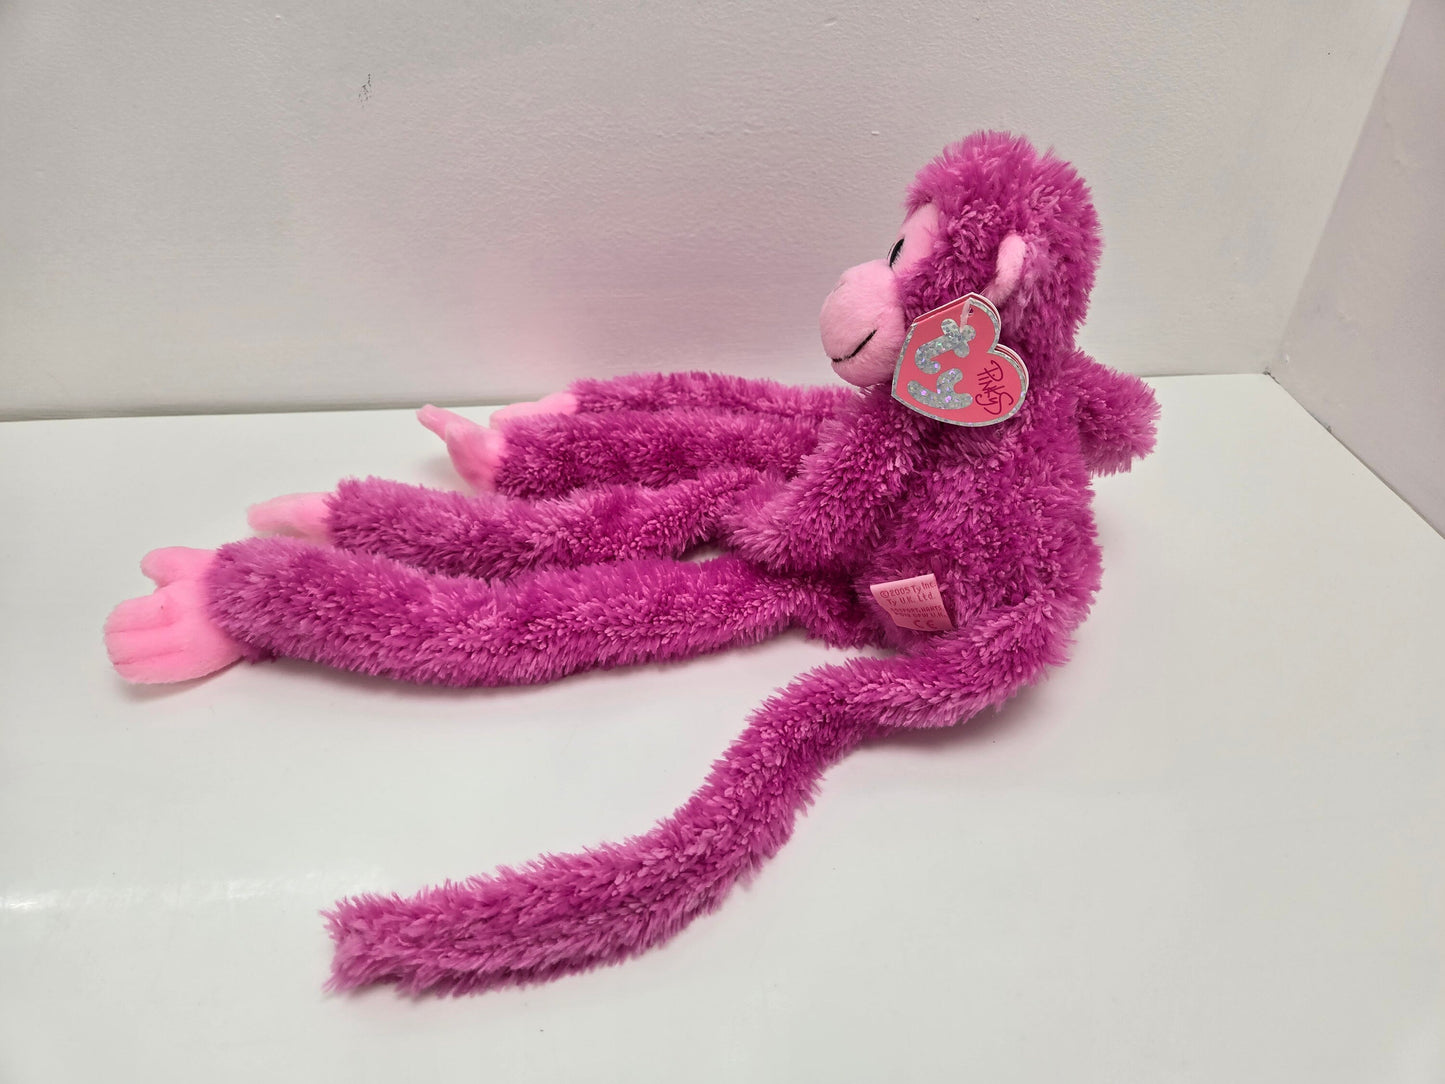 TY Pinkys “Hug Me” the Love Monkey - Pinkys Collection (17 inch)